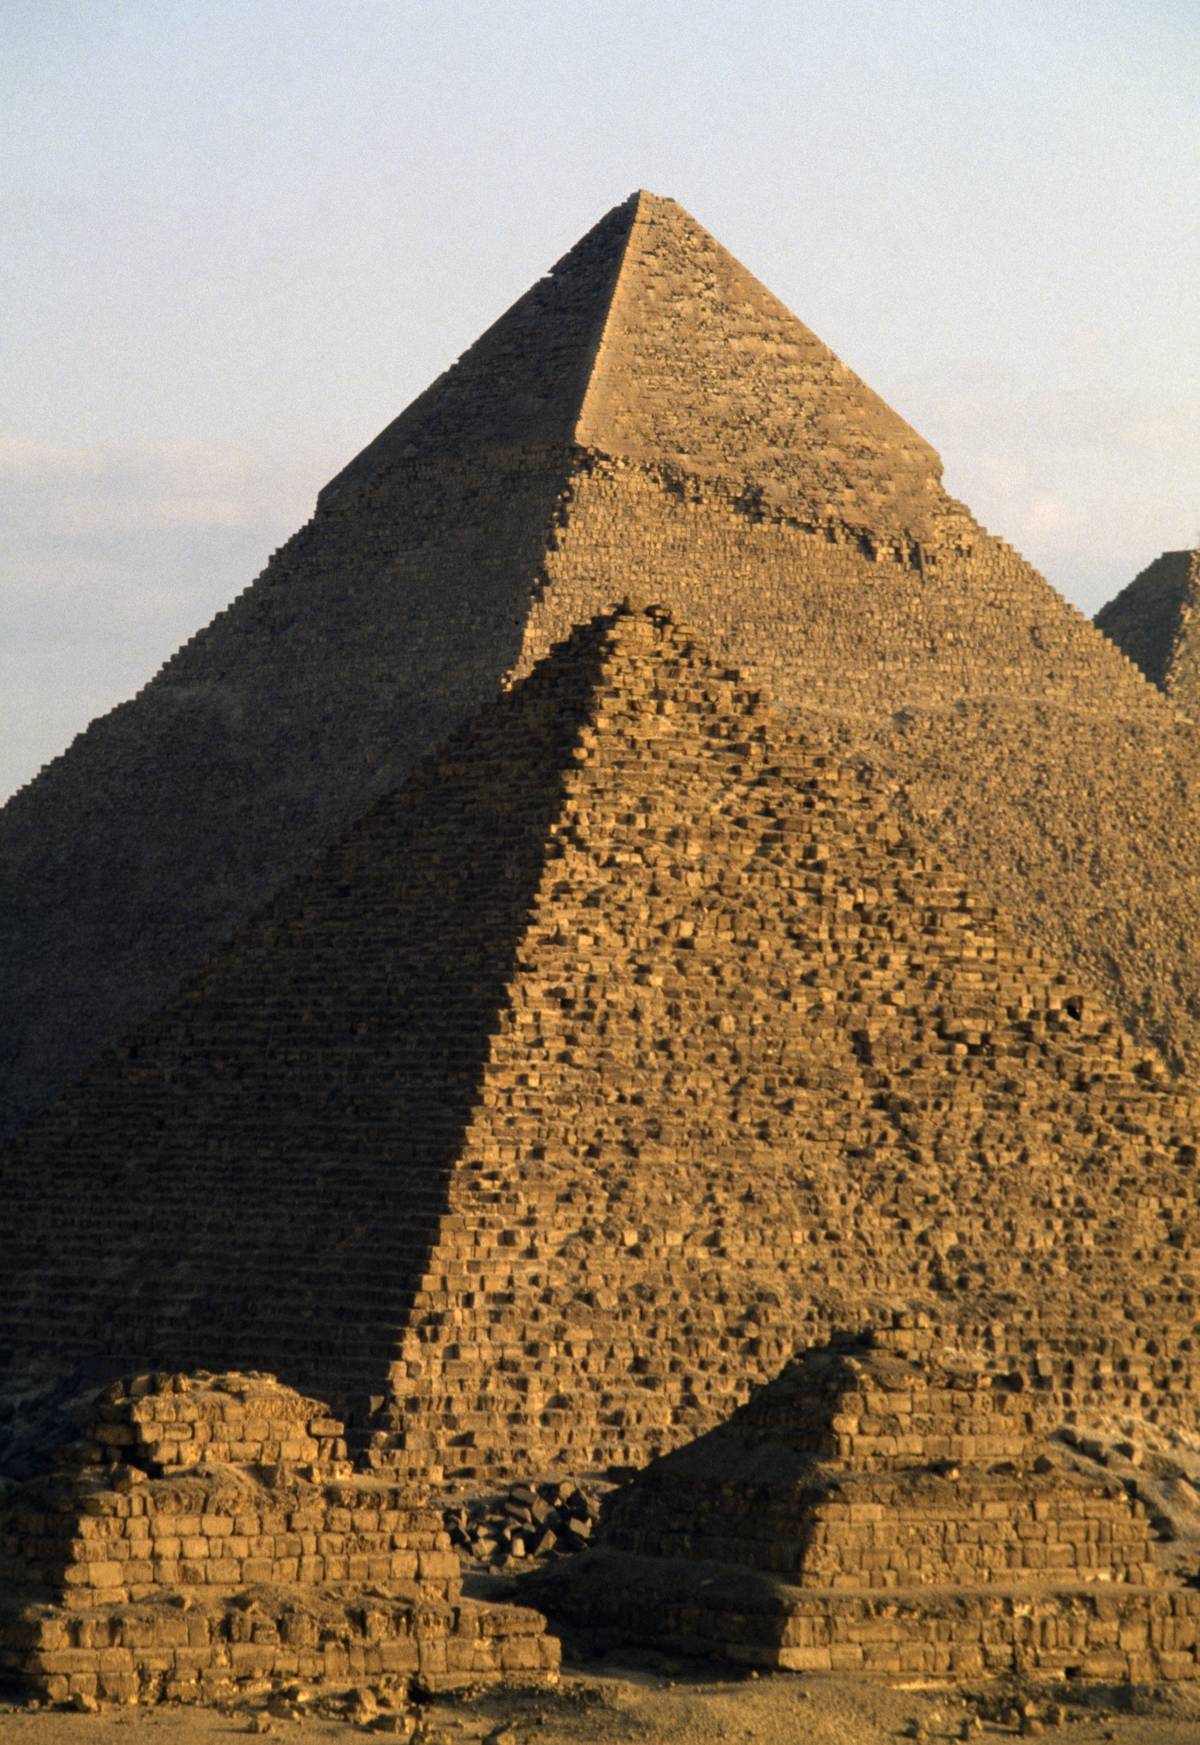 <p>Back in its glorious heyday, the Great Pyramid was literally the jewel of Egypt. Scientists believe the pyramid, covered in reflective limestone, could have been seen from the moon. They are more certain that people living in the mountains of Israel would witness its shiny glory.</p> <p>There's a reason Egyptians called the Great Pyramid "Ikhet." The ancient word roughly translates to "glorious light." No one knows just how bright this light shined and no one has attempted to place reflective limestone back on the pyramid to find out!</p>